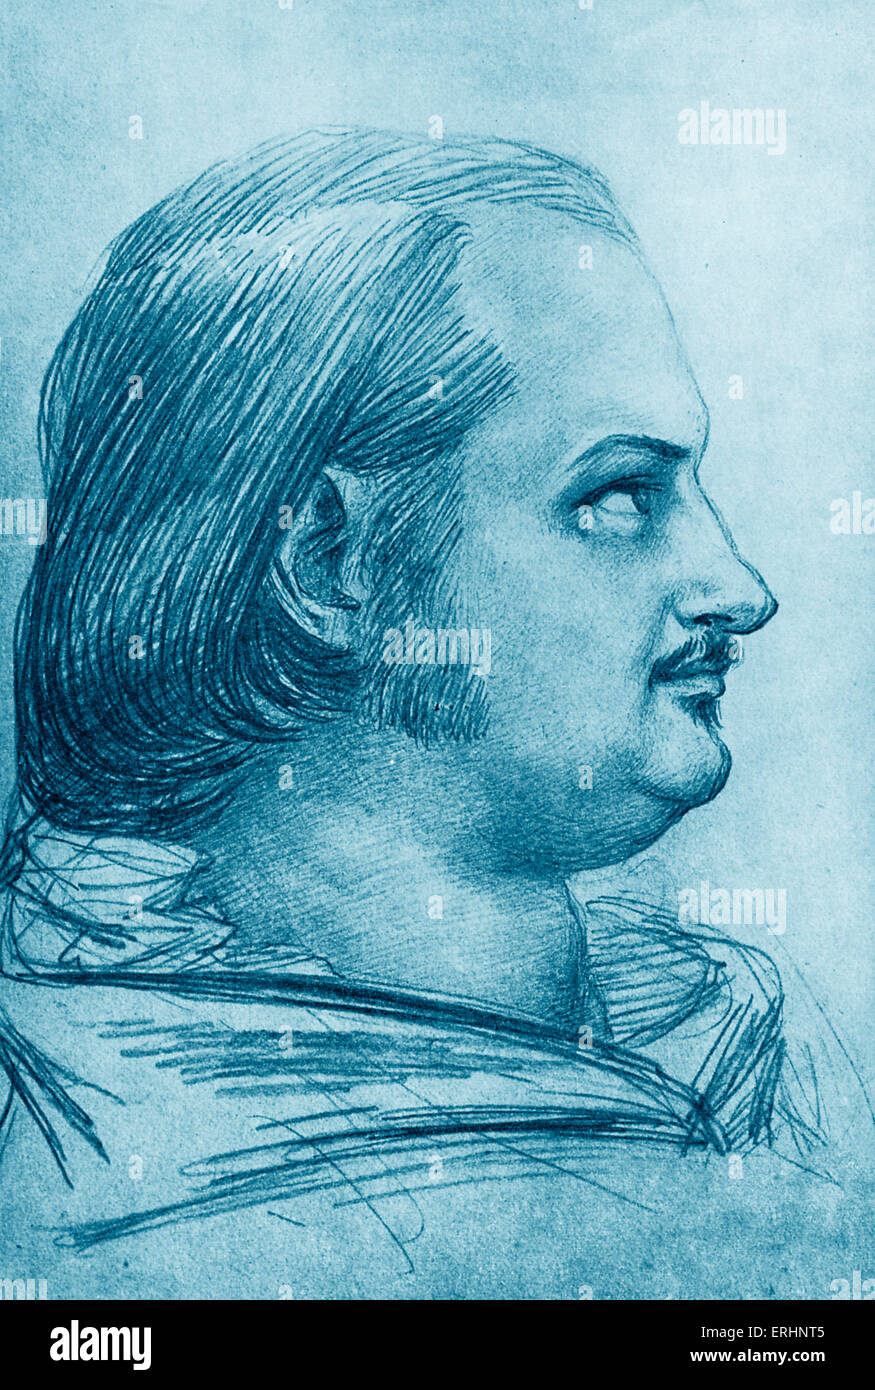 Honoré de Balzac, portrait. by David d'Angers. French novelist and playwright. 20 May 1799 - 18 August 1850. Stock Photo